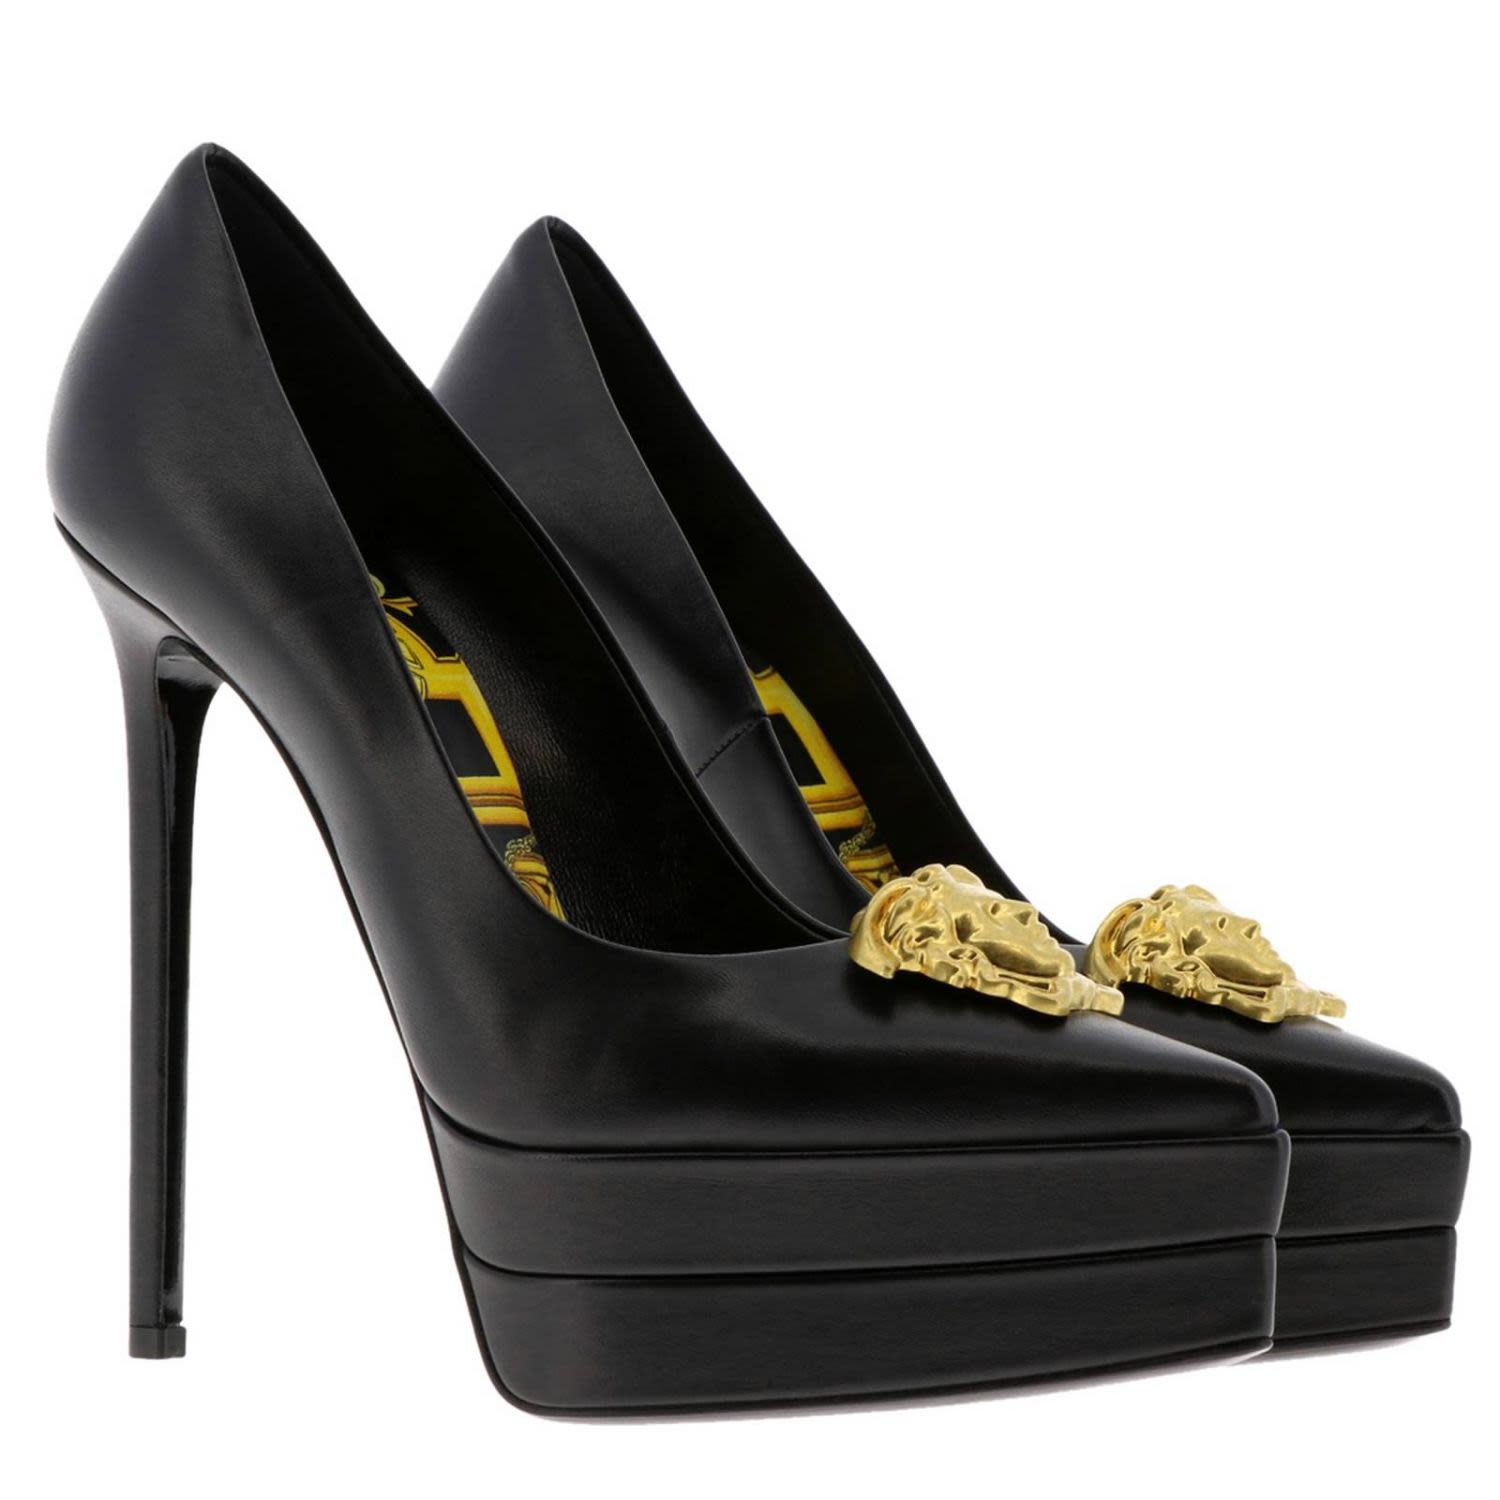 italist | Best price in the market for Versace Versace Pumps Shoes ...